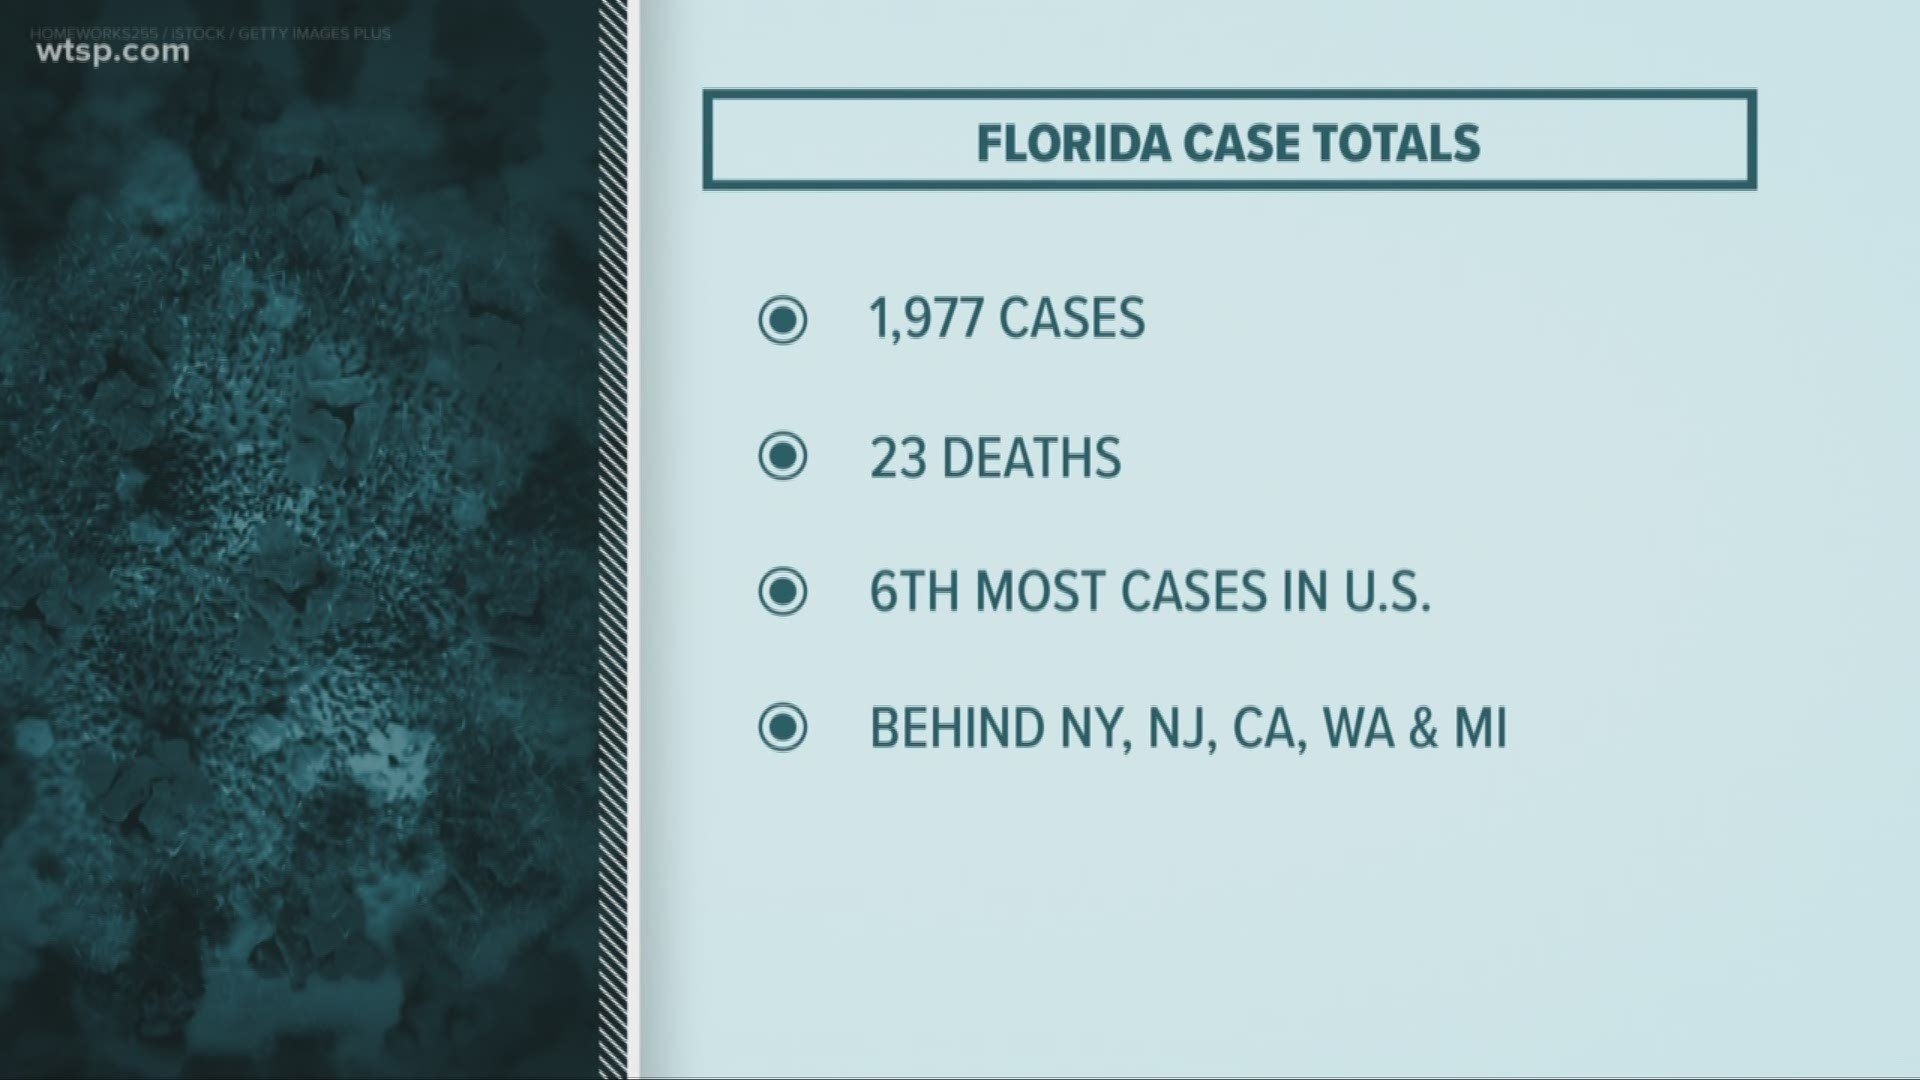 The Florida Department of Health said the number of positive cases in the state was up 295, bringing the total to 1,977 cases.